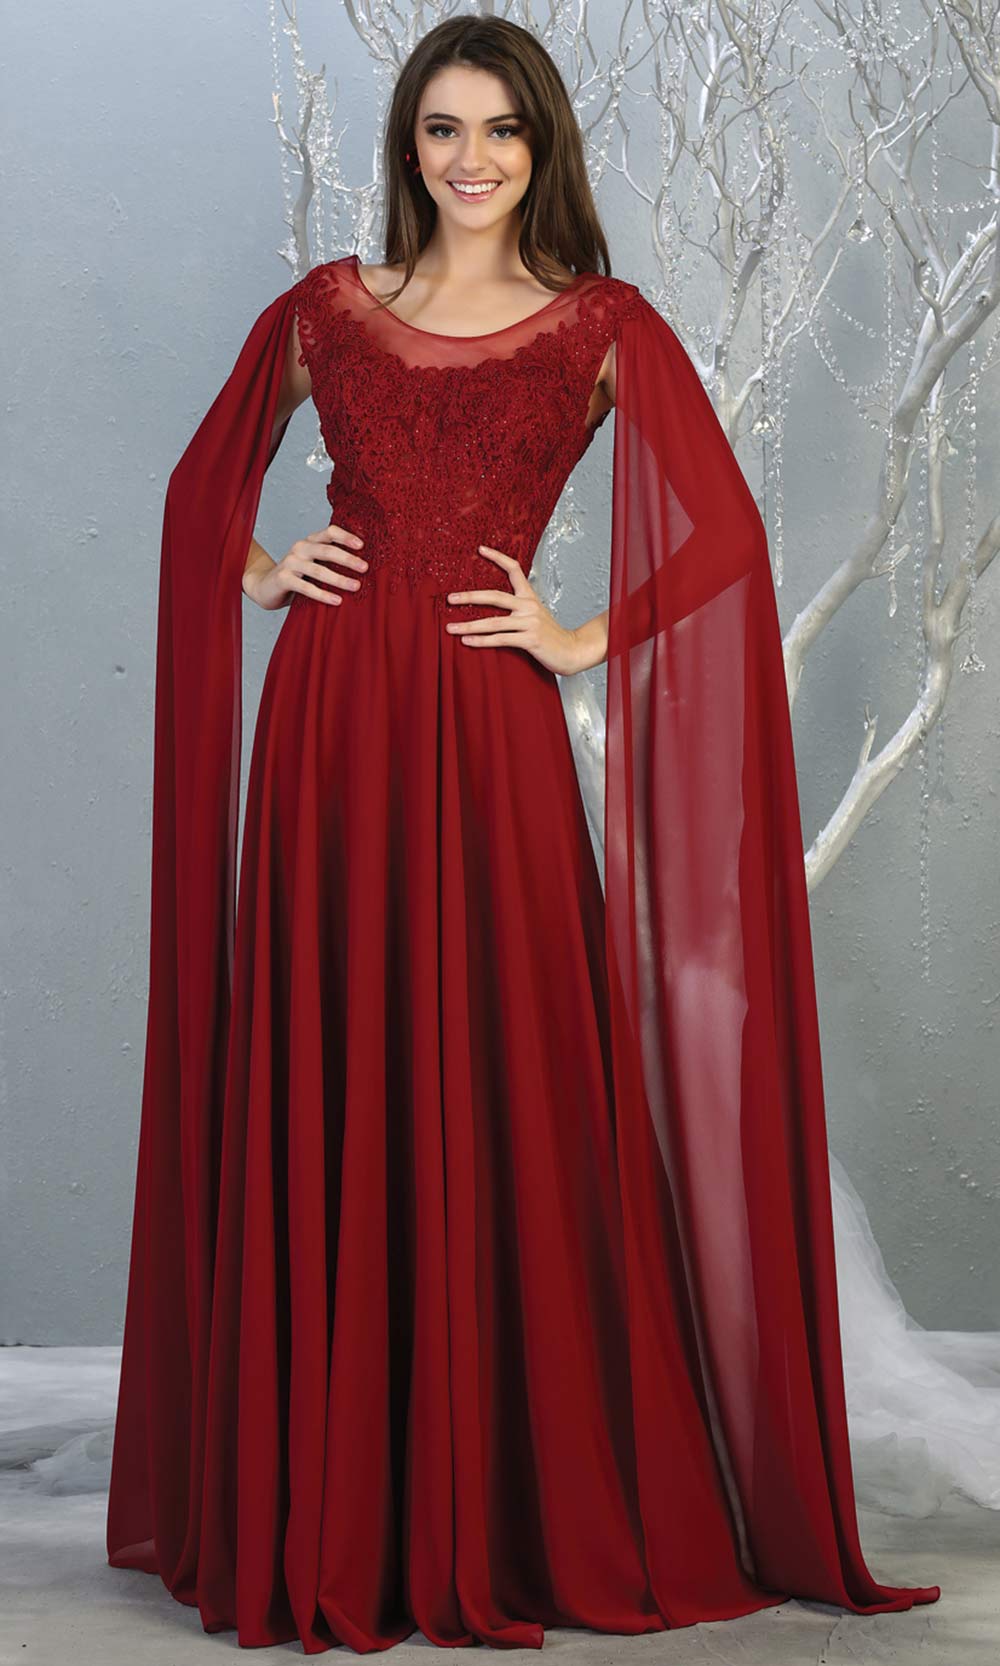 Mayqueen MQ1749 long burgundy red flowy dress w/ long sleeves & low back. This dark red gown is perfect as modest bridesmaid dresses, muslim evening party dress, indowestern gown, formal wedding guest dress, a-line evening party dress.Plus sizes avail.jpg